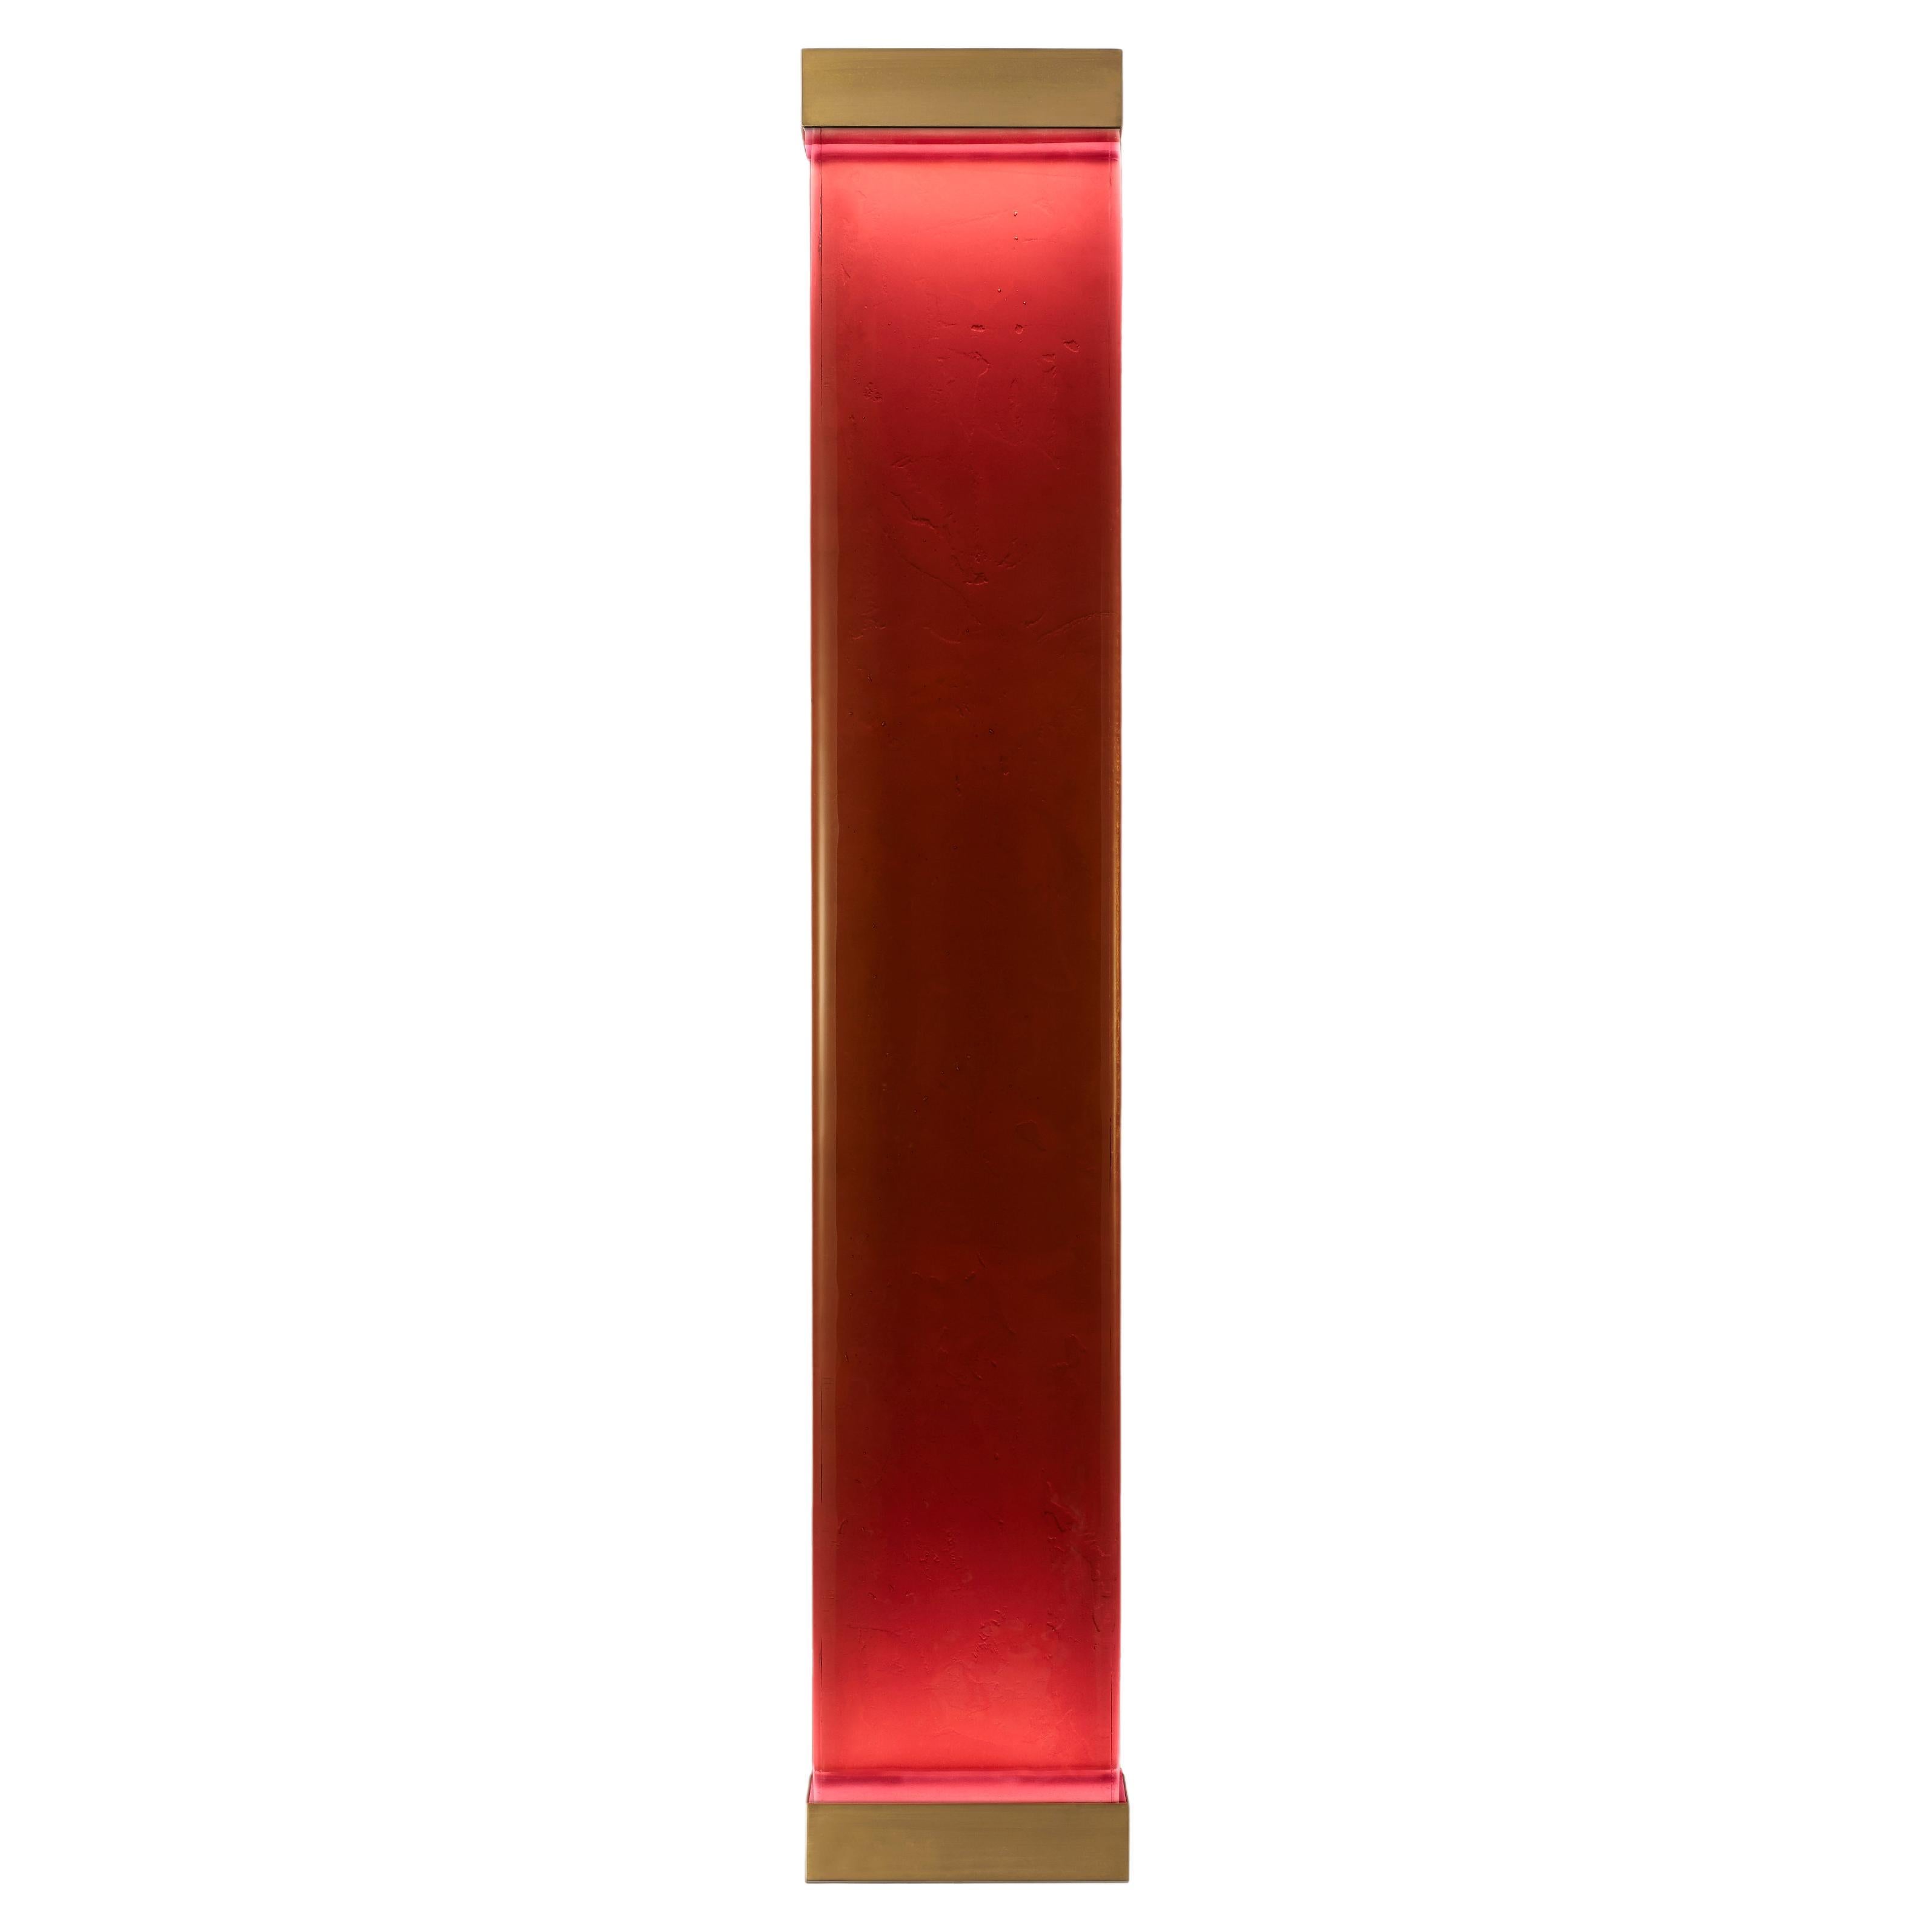 Jud Wall Lamps Carminio by Draga&Aurel Resin, 21st Century Glass Resin Brass  For Sale